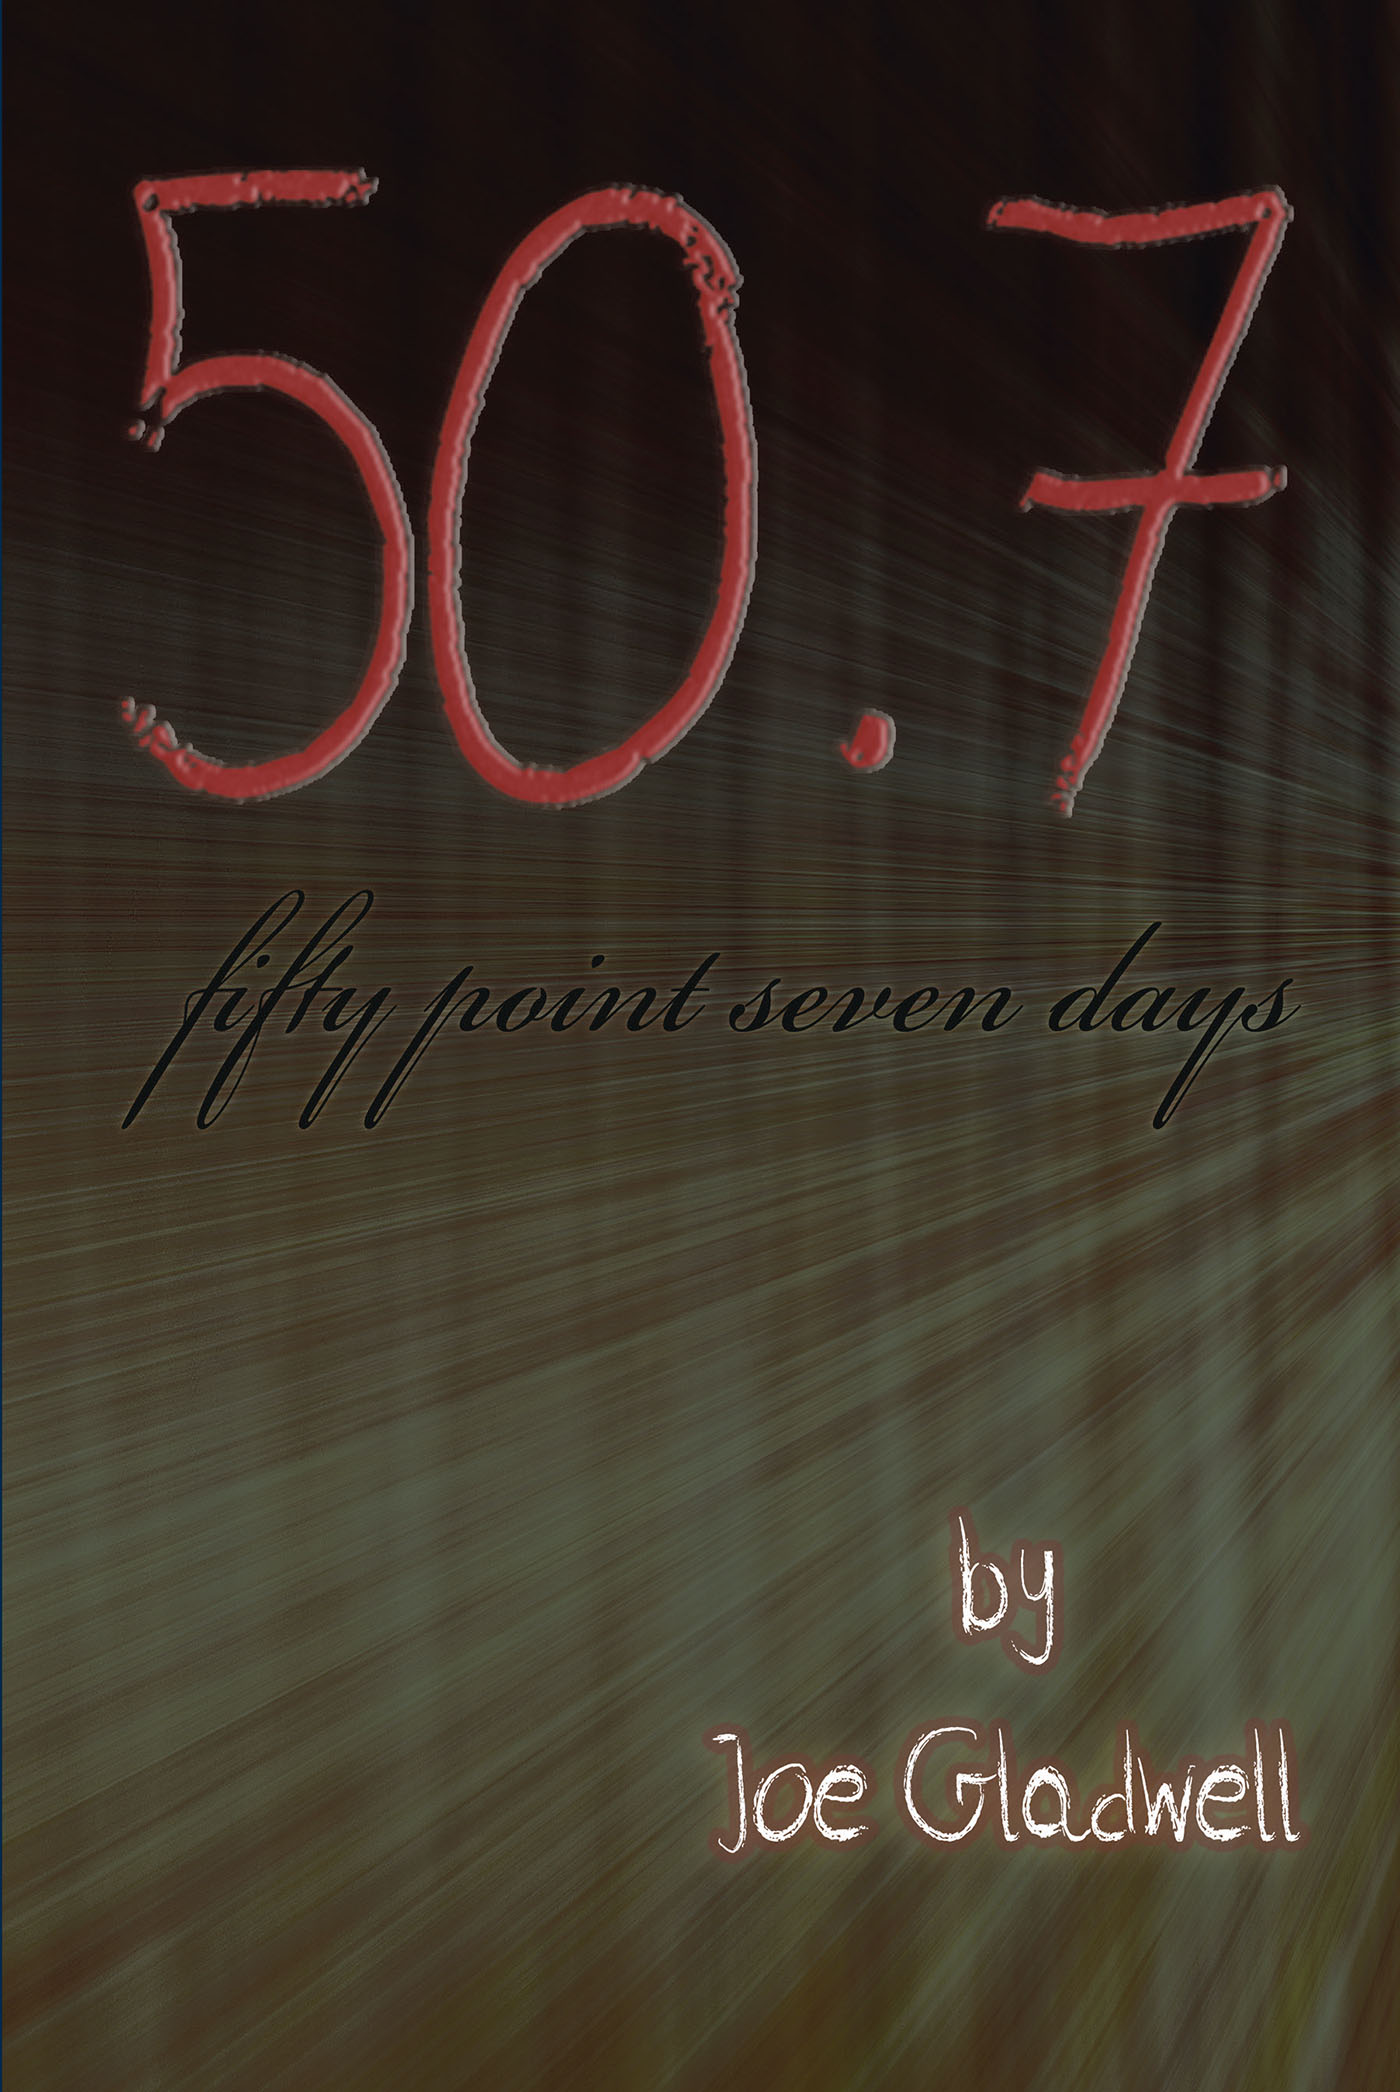 Fifty Point Seven Days Cover Image